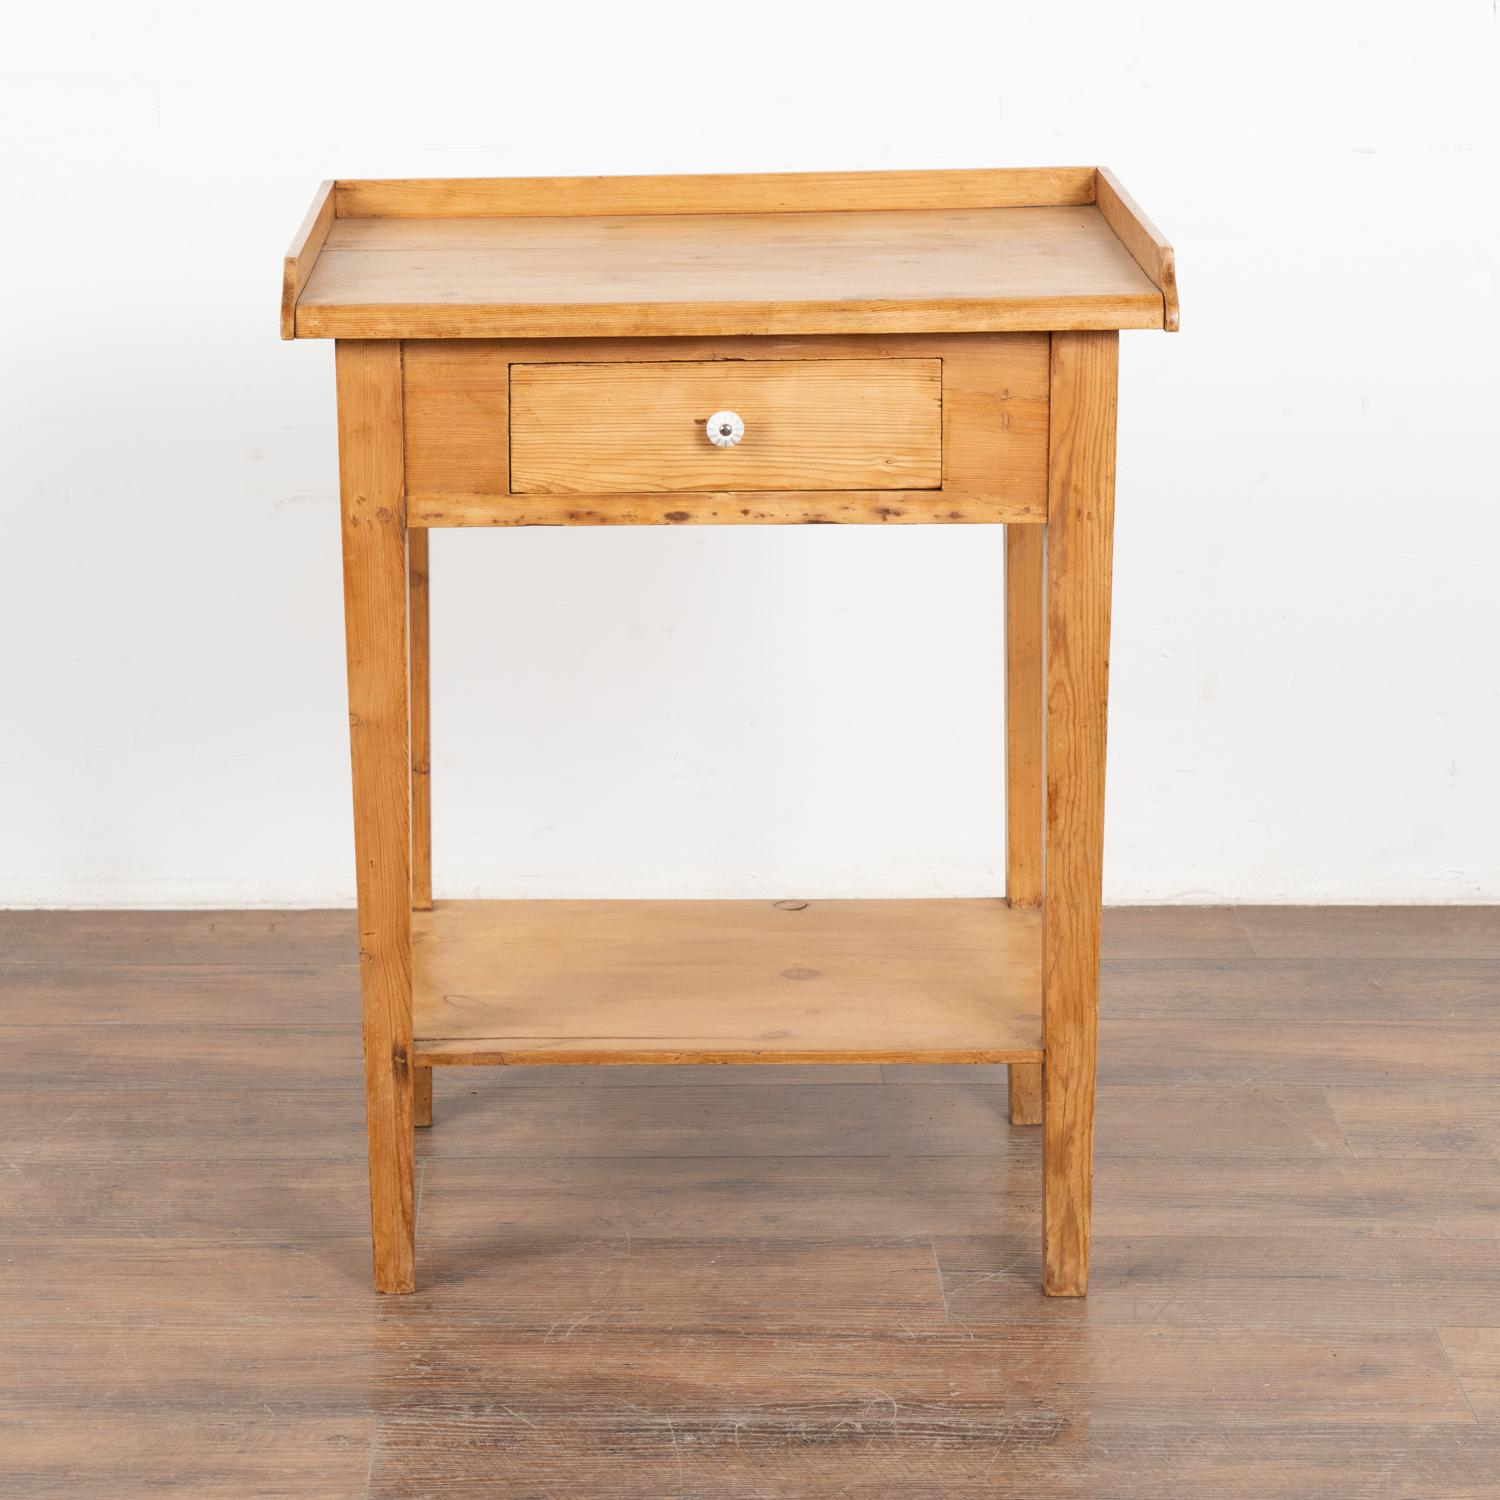 Country Small Pine Side Table With Drawer, Denmark circa 1890